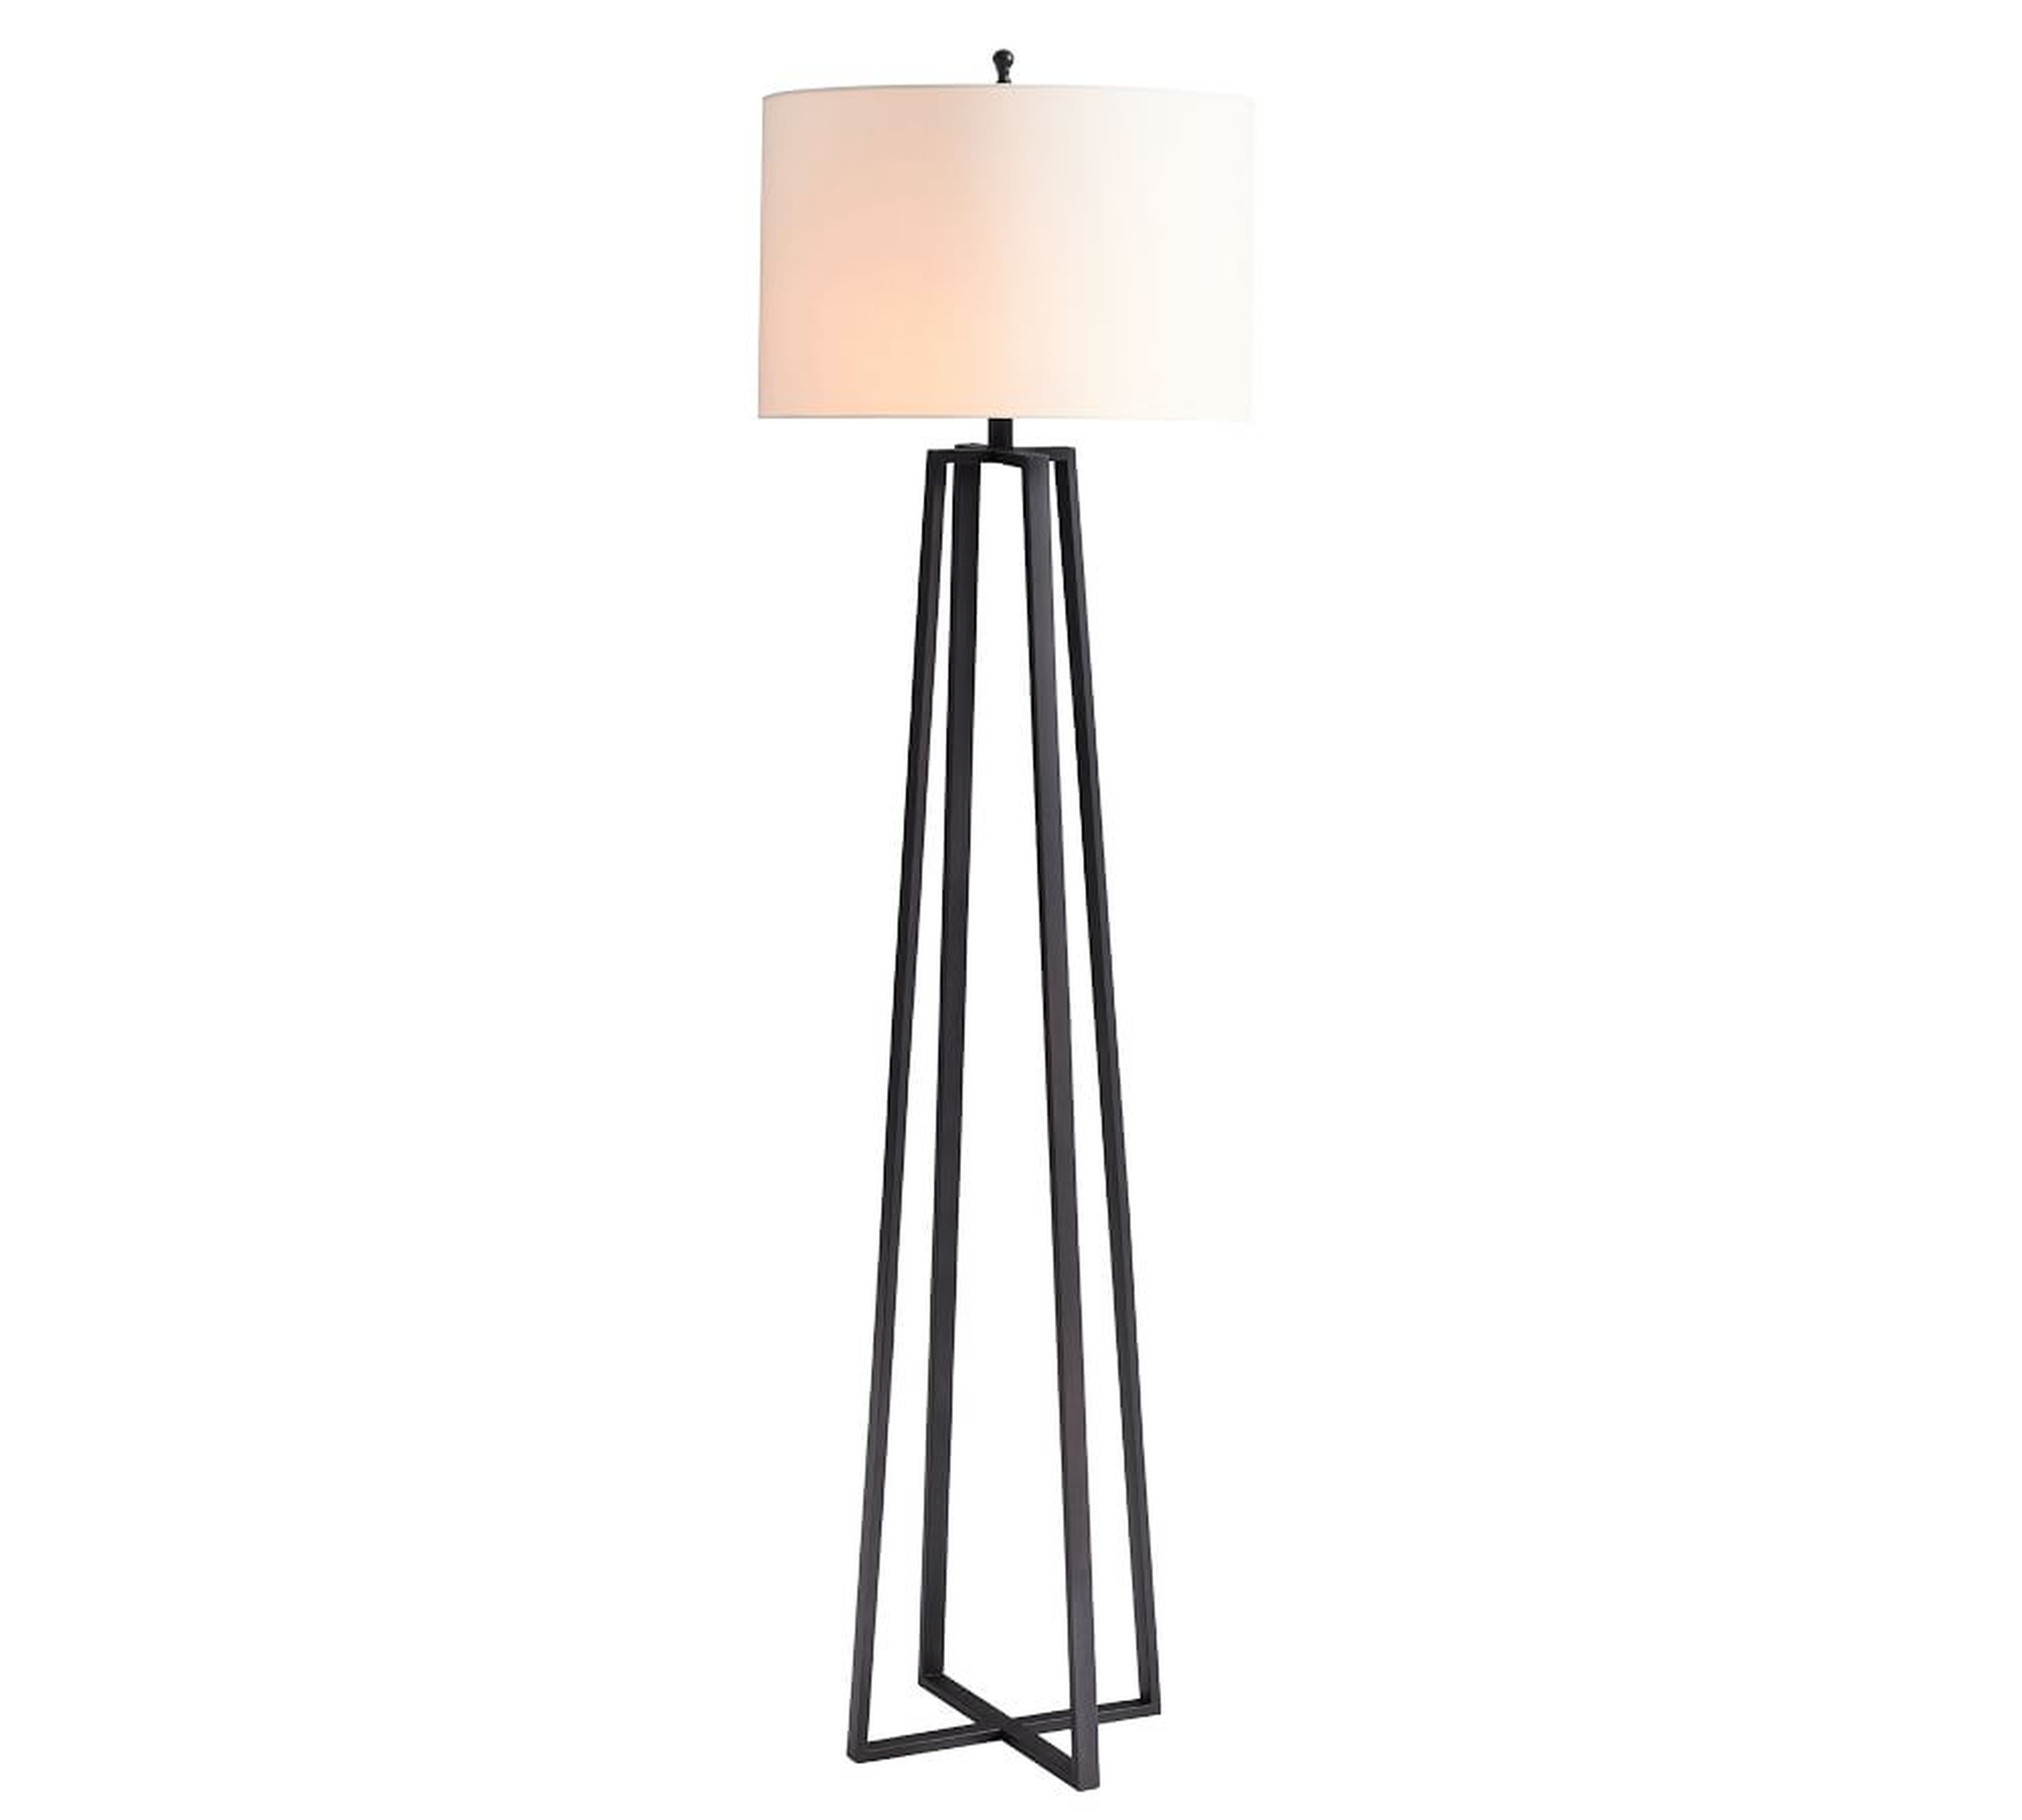 Carter Floor Lamp, Bronze with Ivory Shade - Pottery Barn